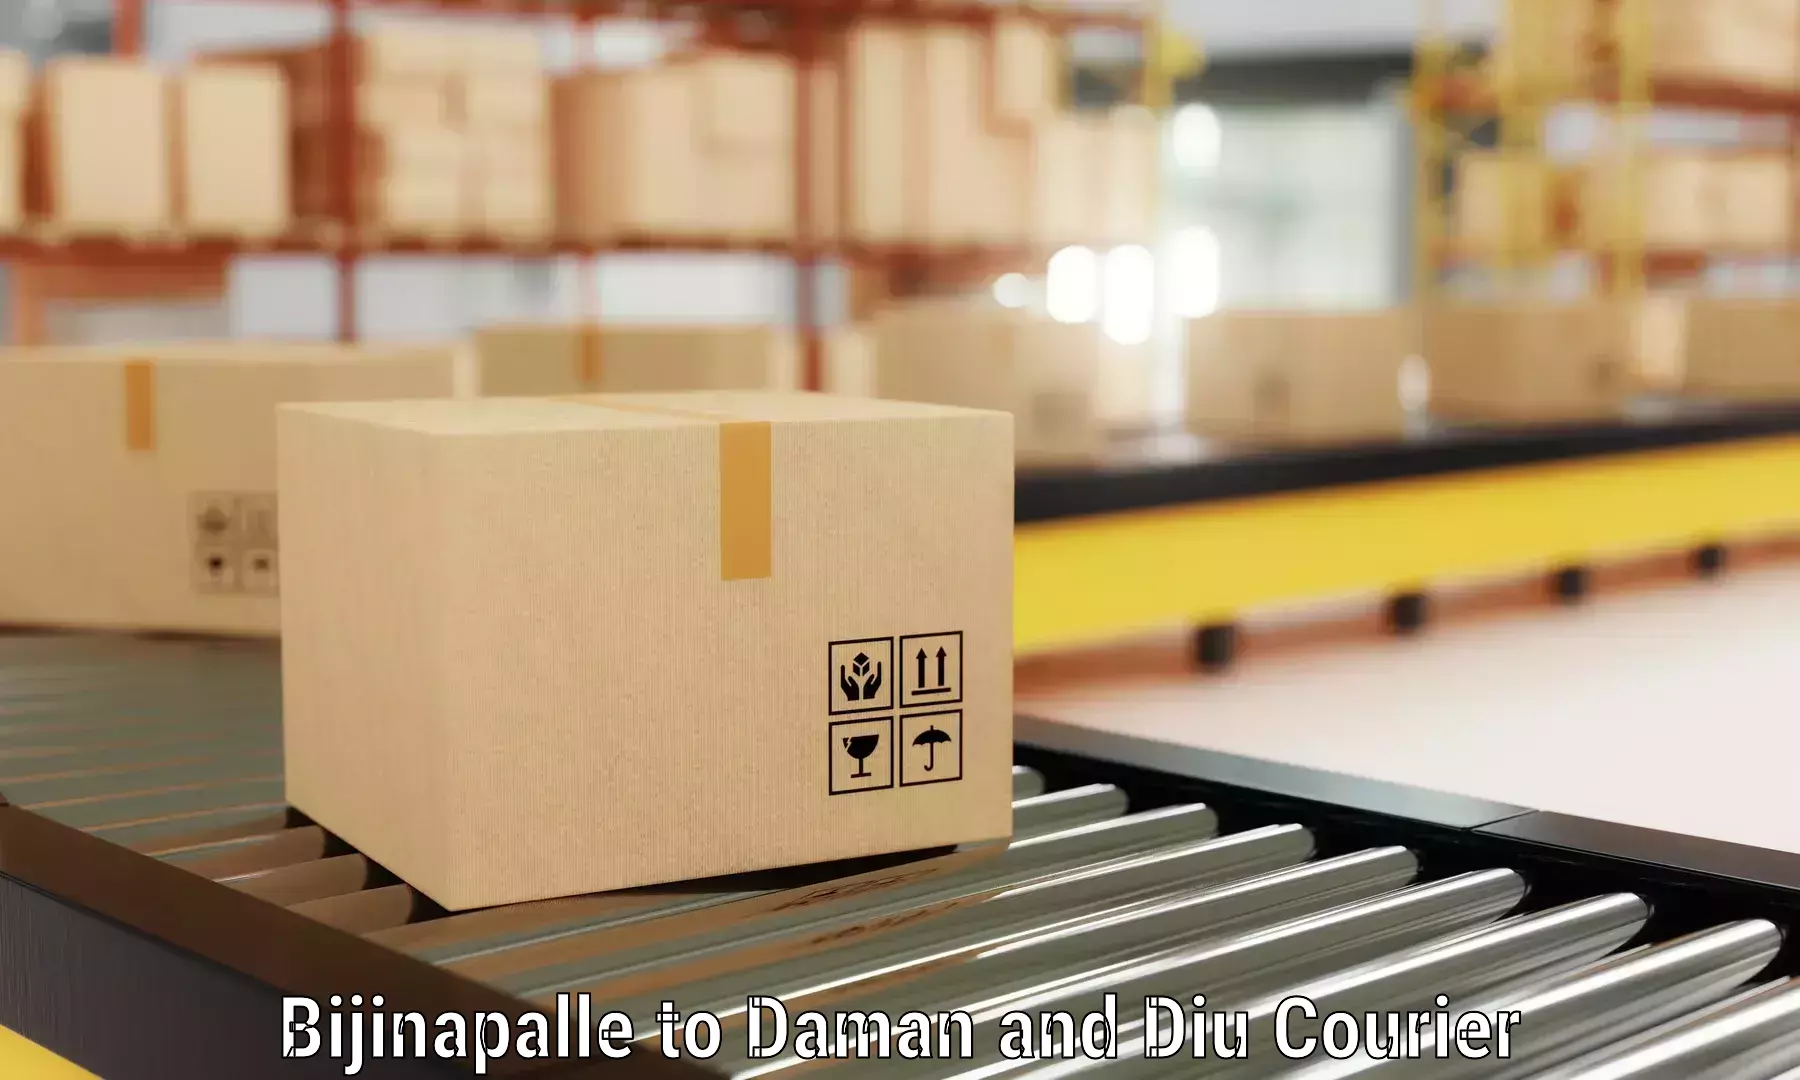 Furniture delivery service Bijinapalle to Diu